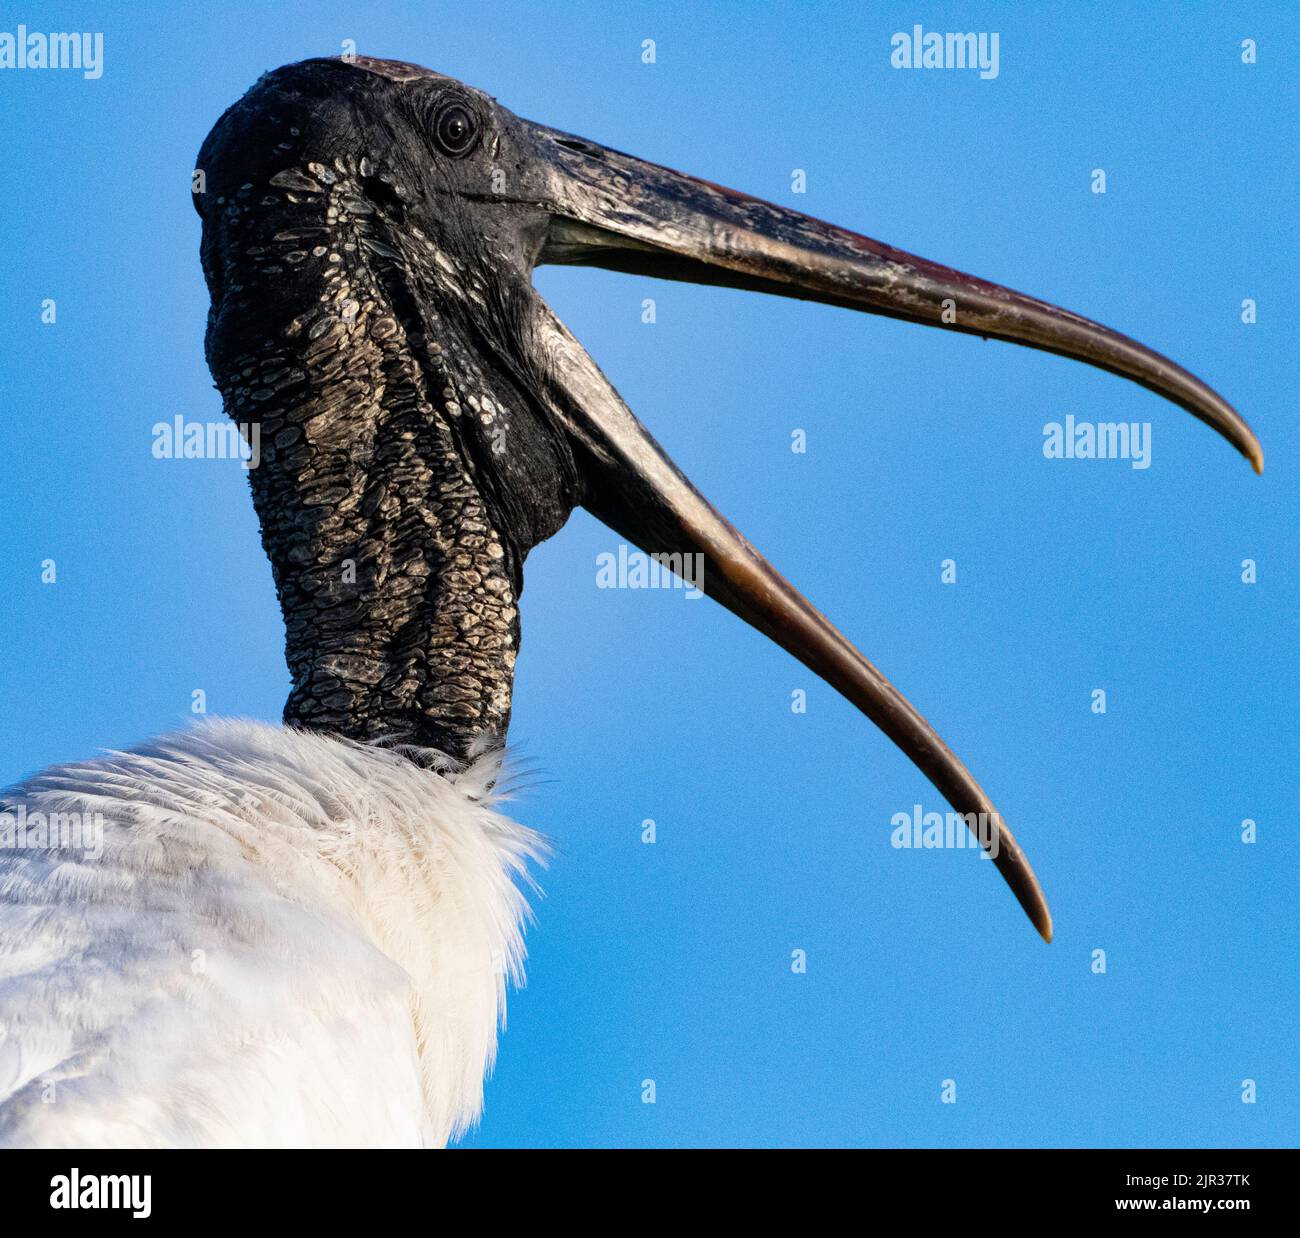 Squawking Wood Stork with beak wide open in head portrait calls loudly against blue sky at Delray Beach in Florida, United States Stock Photo